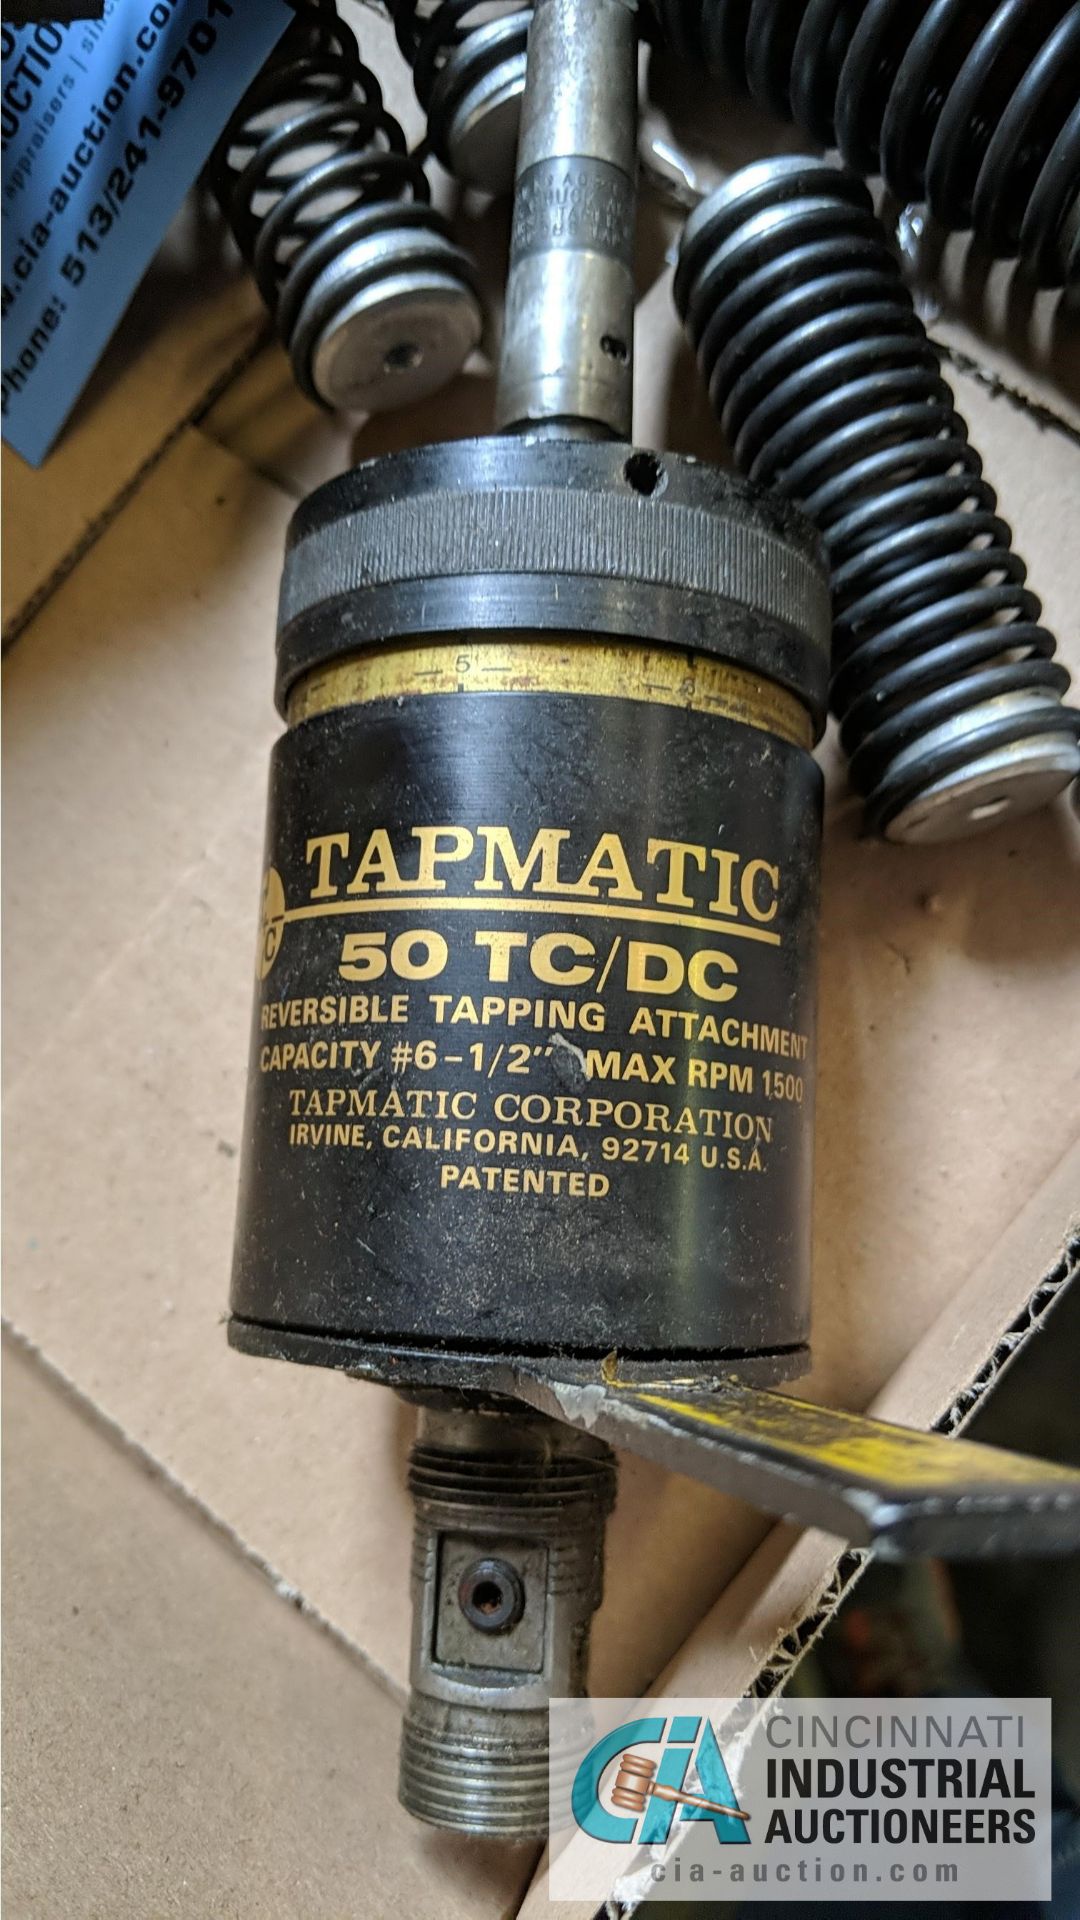 TAPMATIC NO. 50 TC/DC TAPPING HEADS - Image 3 of 3